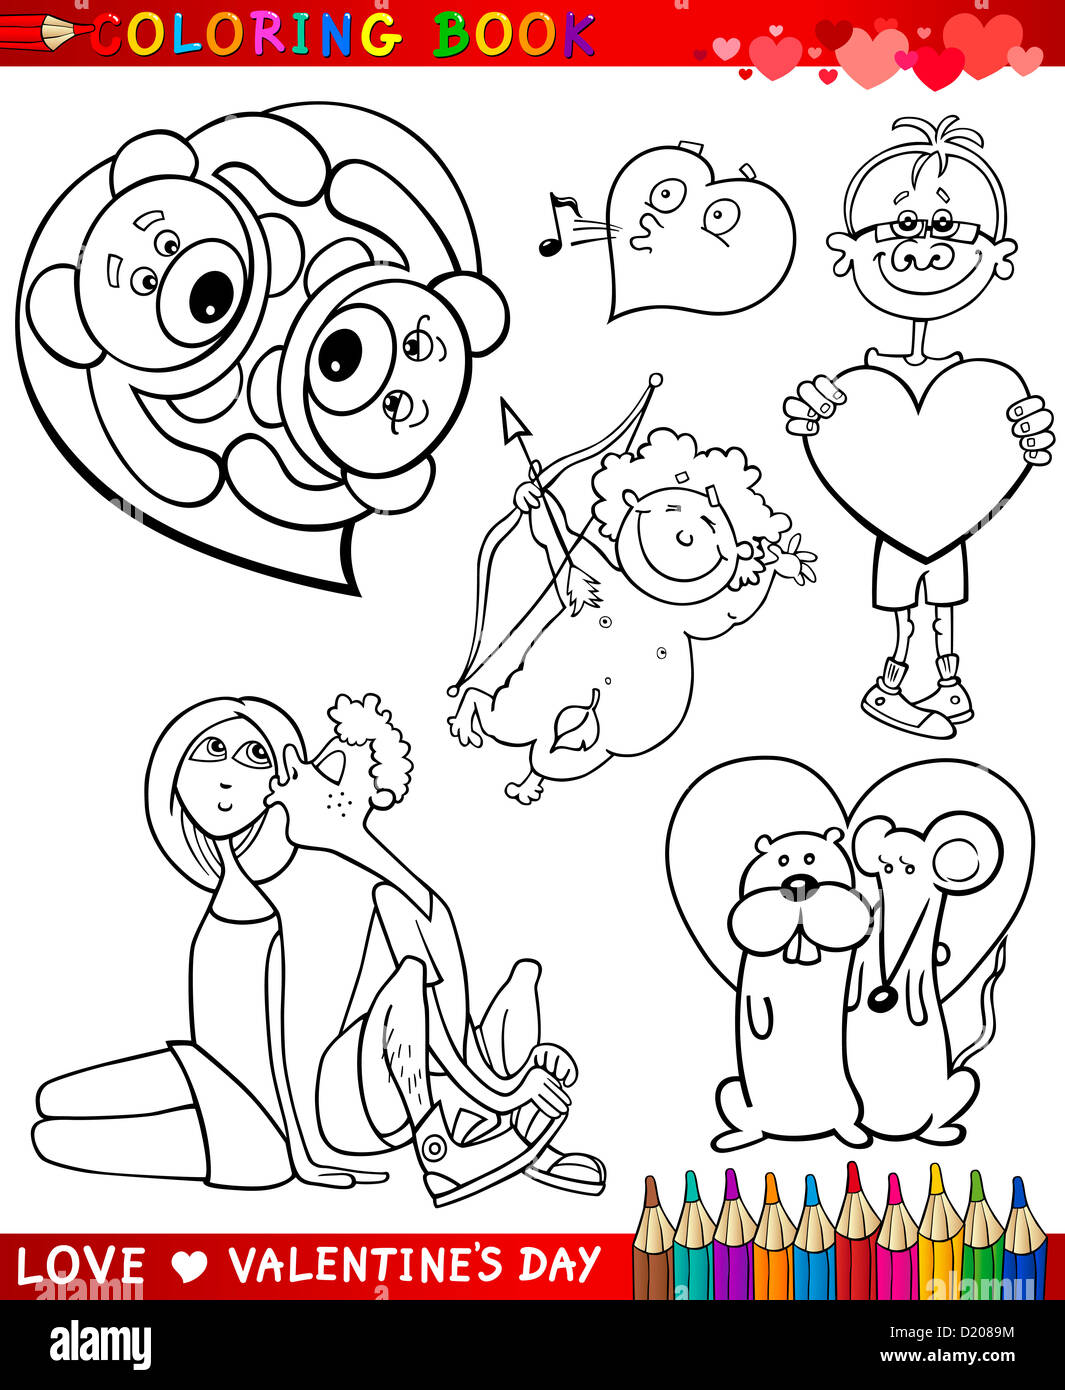 Valentine's Day and Love Themes Collection Set of Black and White Cartoon Illustrations for Coloring Book Stock Photo